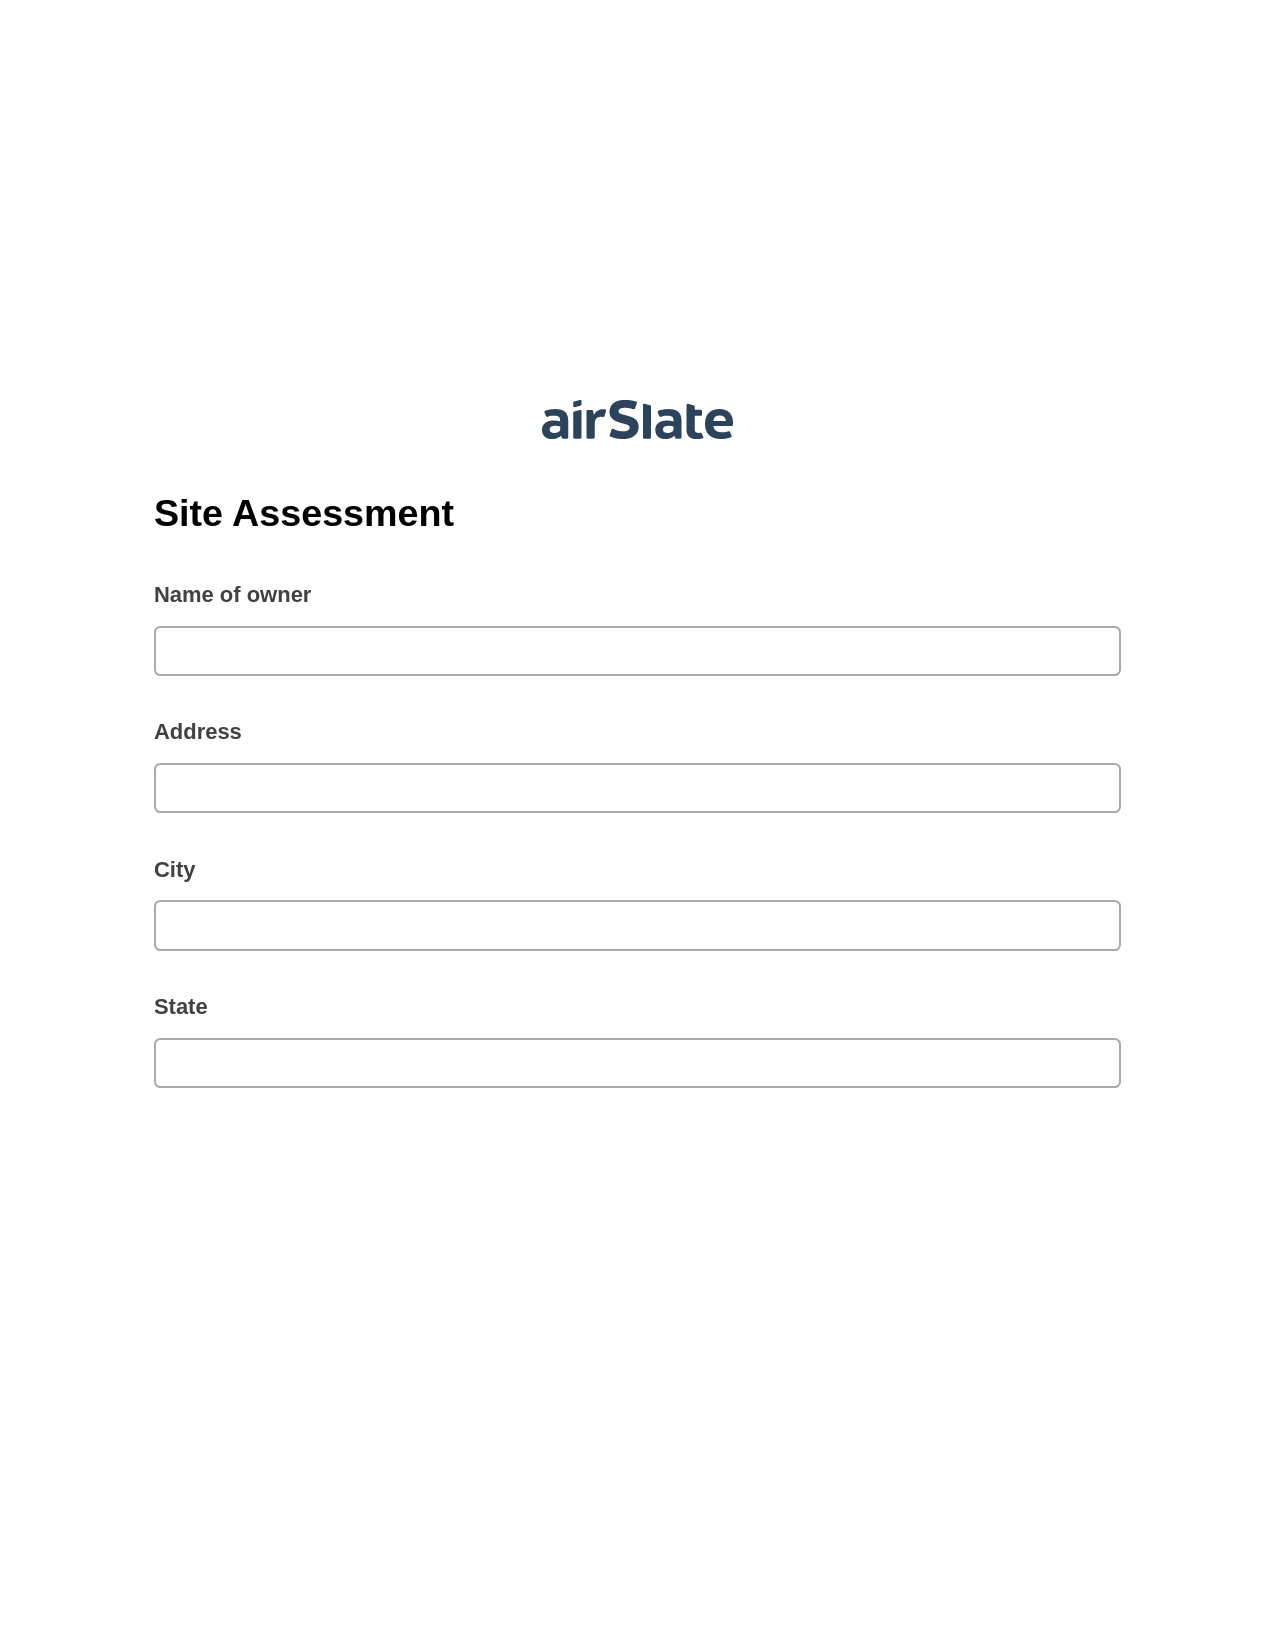 Site Assessment System Bot - Slack Two-Way Binding Bot, Email Notification Bot, Export to Excel 365 Bot